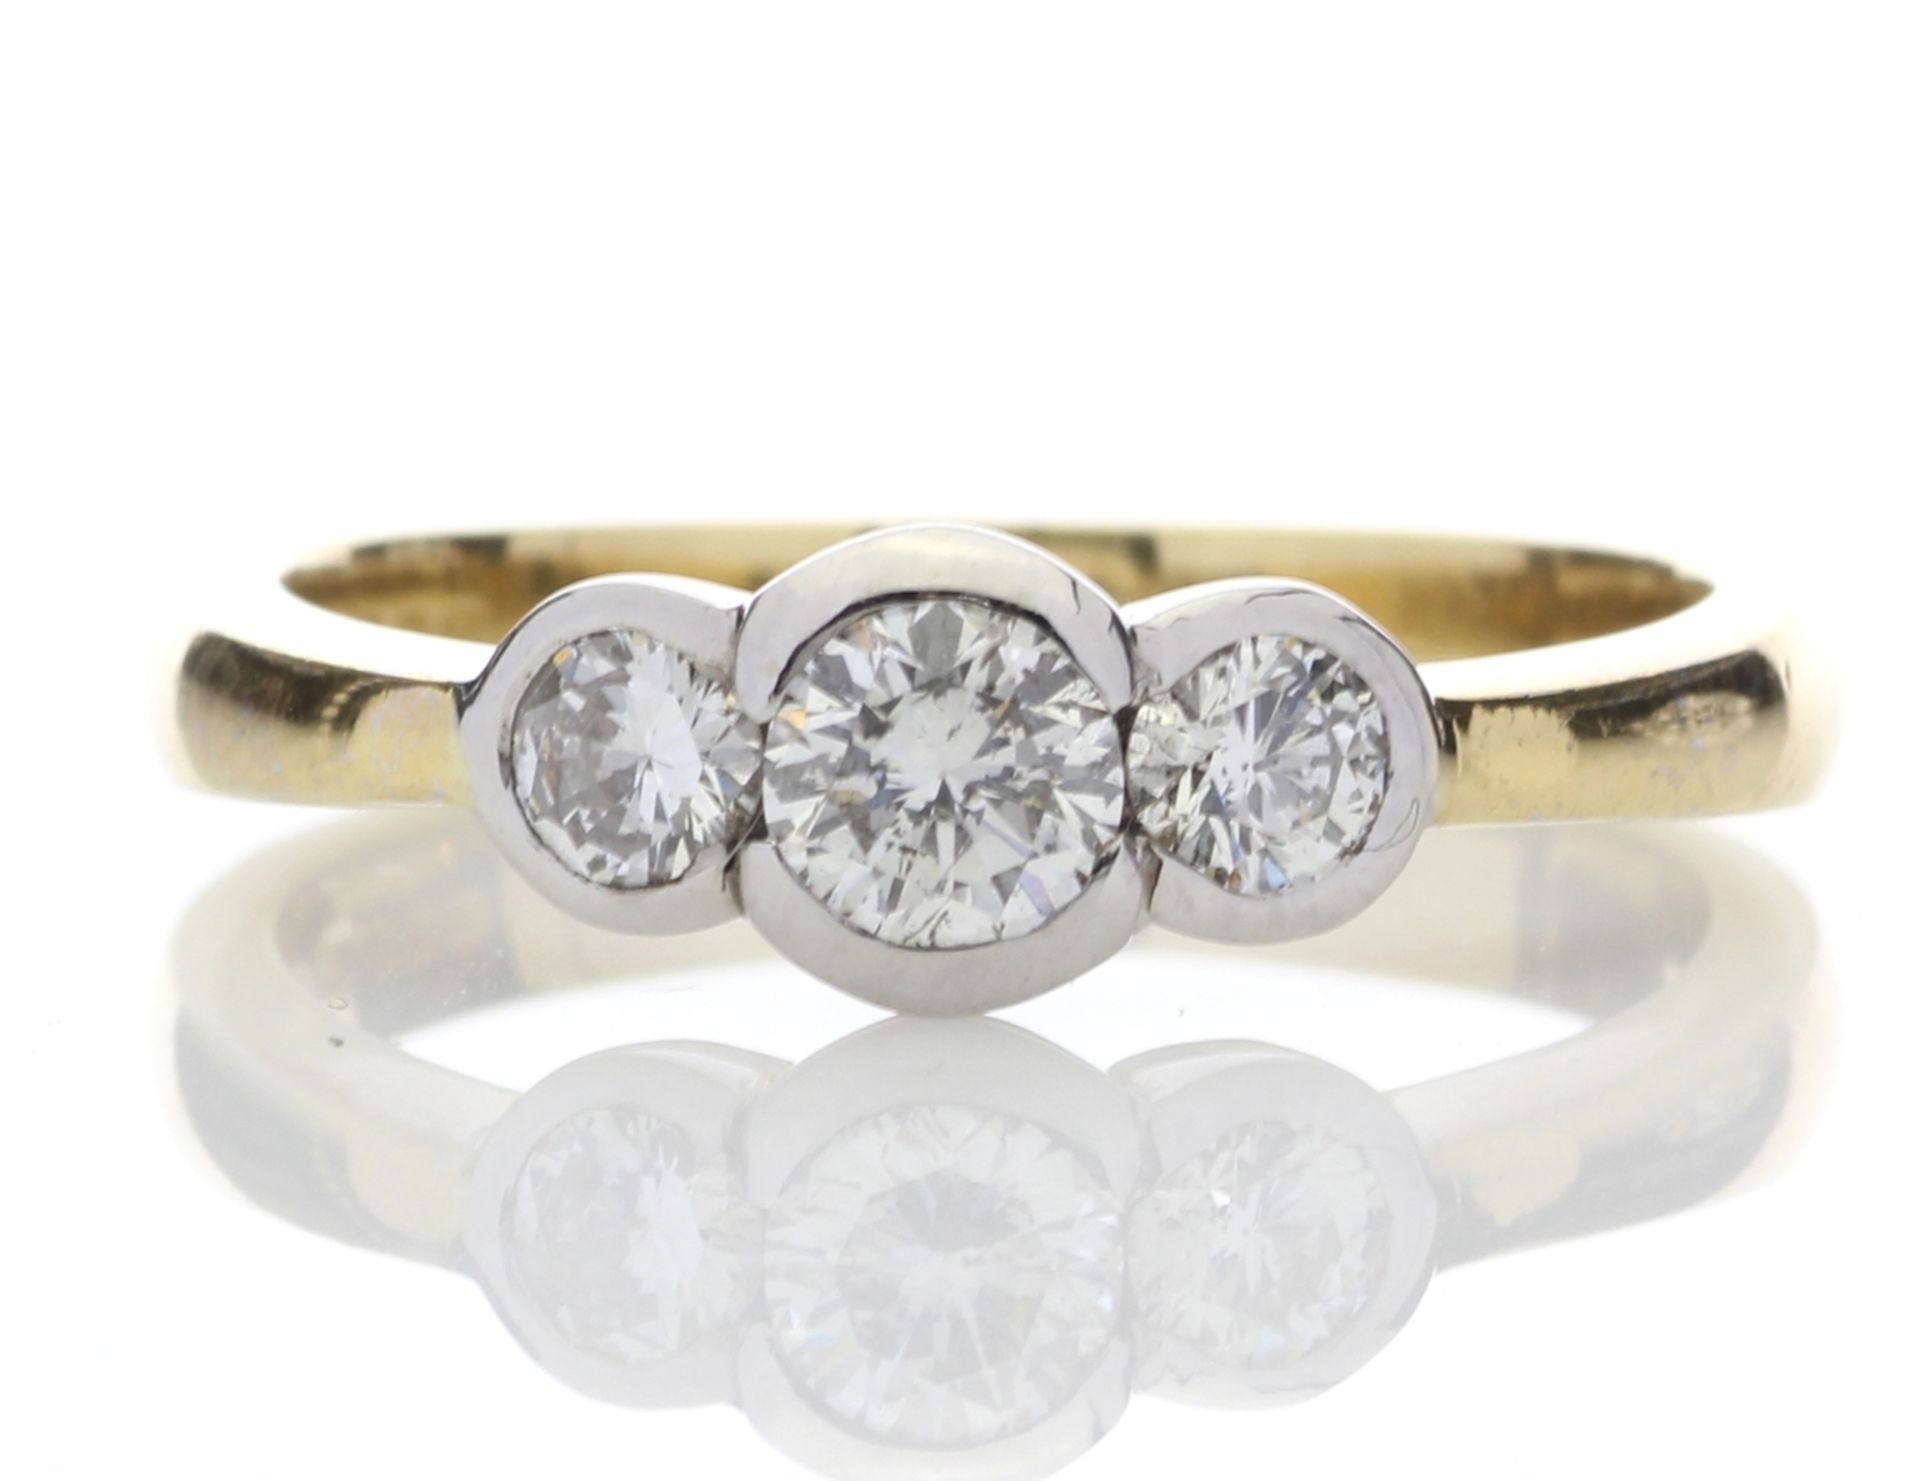 18ct Three Stone Rub Over Set Diamond Ring 0.65 Carats - Valued By GIE £11,495.00 - Three round